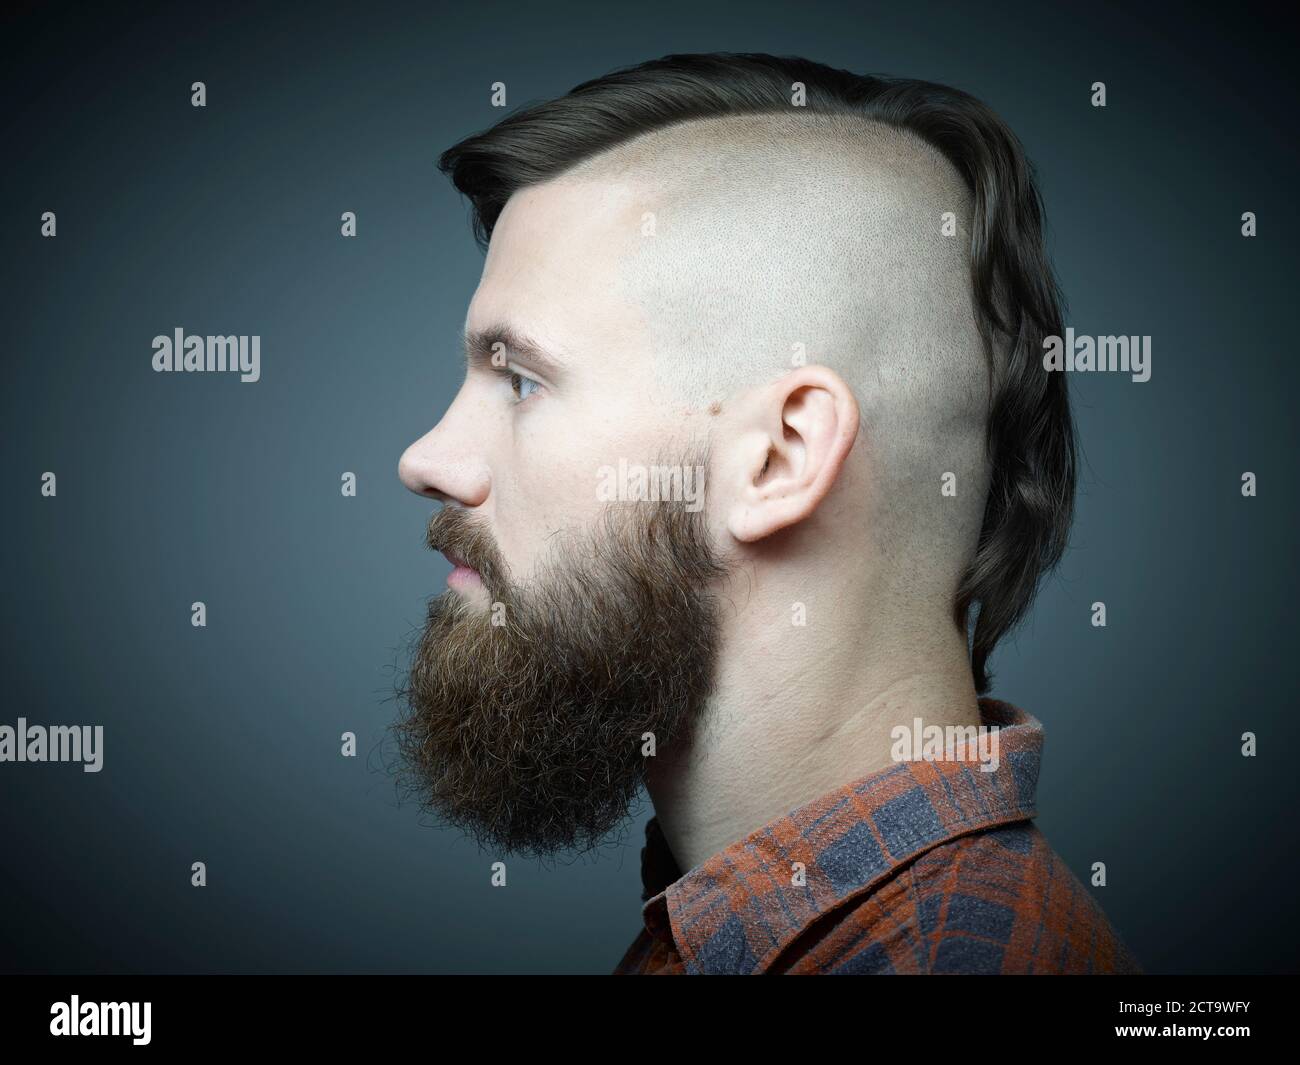 Profile of young man with shaved head Stock Photo